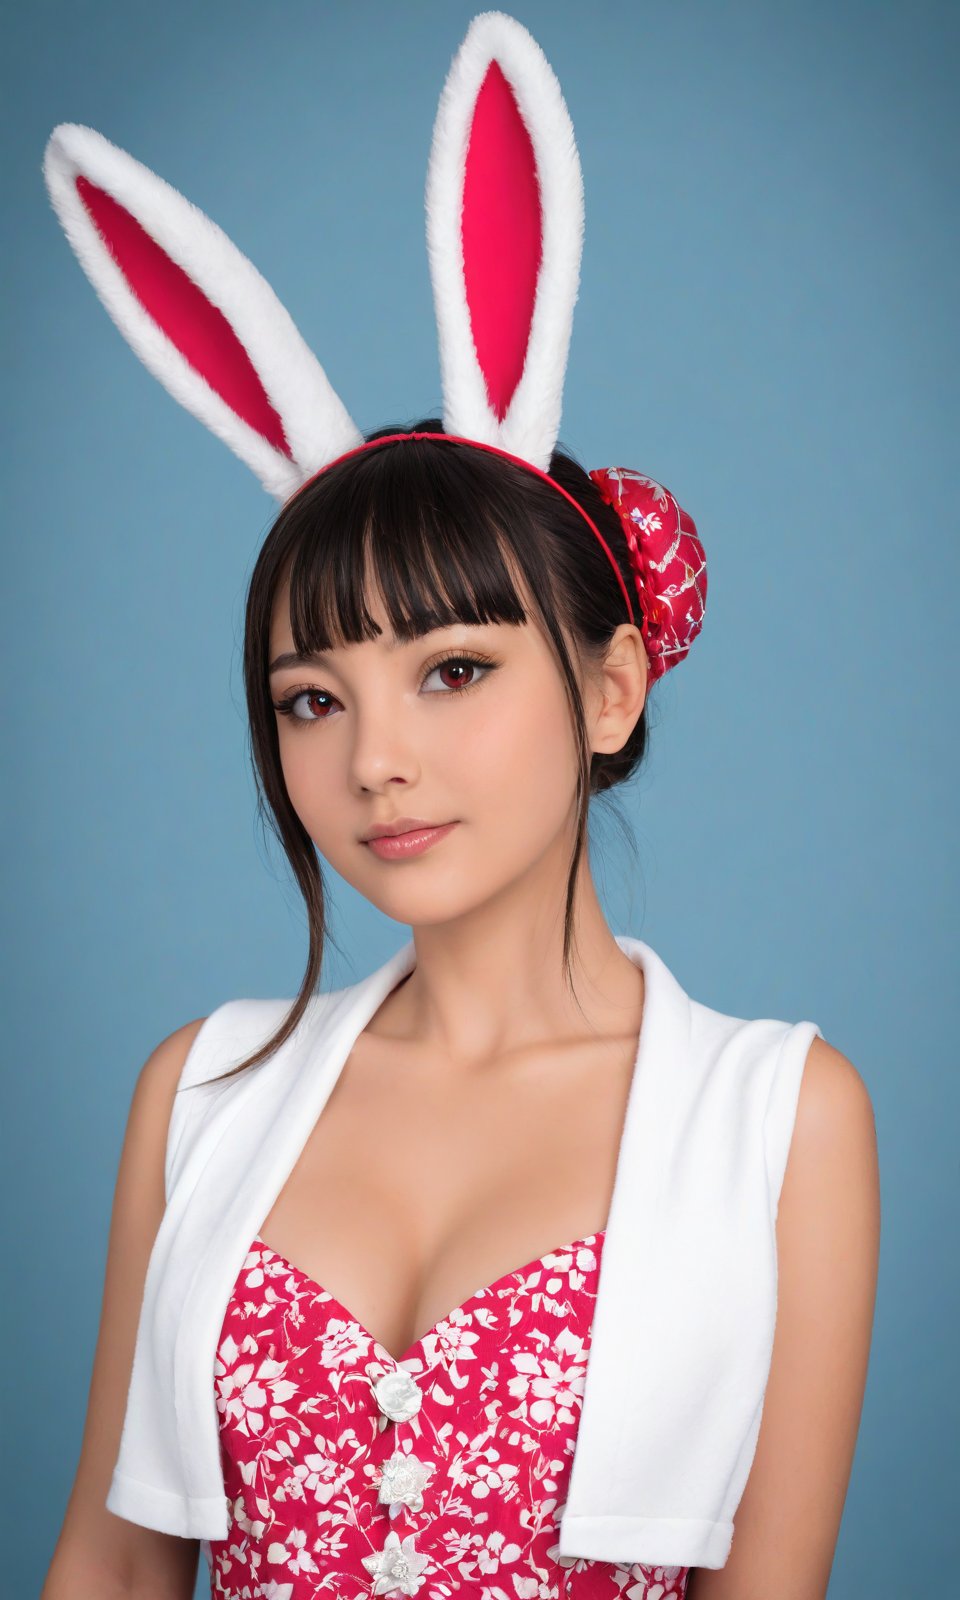 score_9,score_8_up,score_7_up, source_hubg, photorealistic,Extremely Realistic,in depth,cinematic light,hubggirl,

BREAK 
hubggirl, red eyes, black hair, hair bun with accessories, traditional East Asian attire, rabbit ears headpiece, black and teal clothing, cloud pattern on garment, mystical, two black rabbits, one on shoulder and one in foreground, pale skin, blush on cheeks, serious expression, white background, portrait, upper body shot, artful composition, detailed line art, vibrant color contrast, 

BREAK 
perfect hands, perfect lighting, vibrant colors, intricate details, high detailed skin, intricate background, 
realistic, raw, analog, taken by Canon EOS,SIGMA Art Lens 35mm F1.4,ISO 200 Shutter Speed 2000,Vivid picture,More Reasonable Details